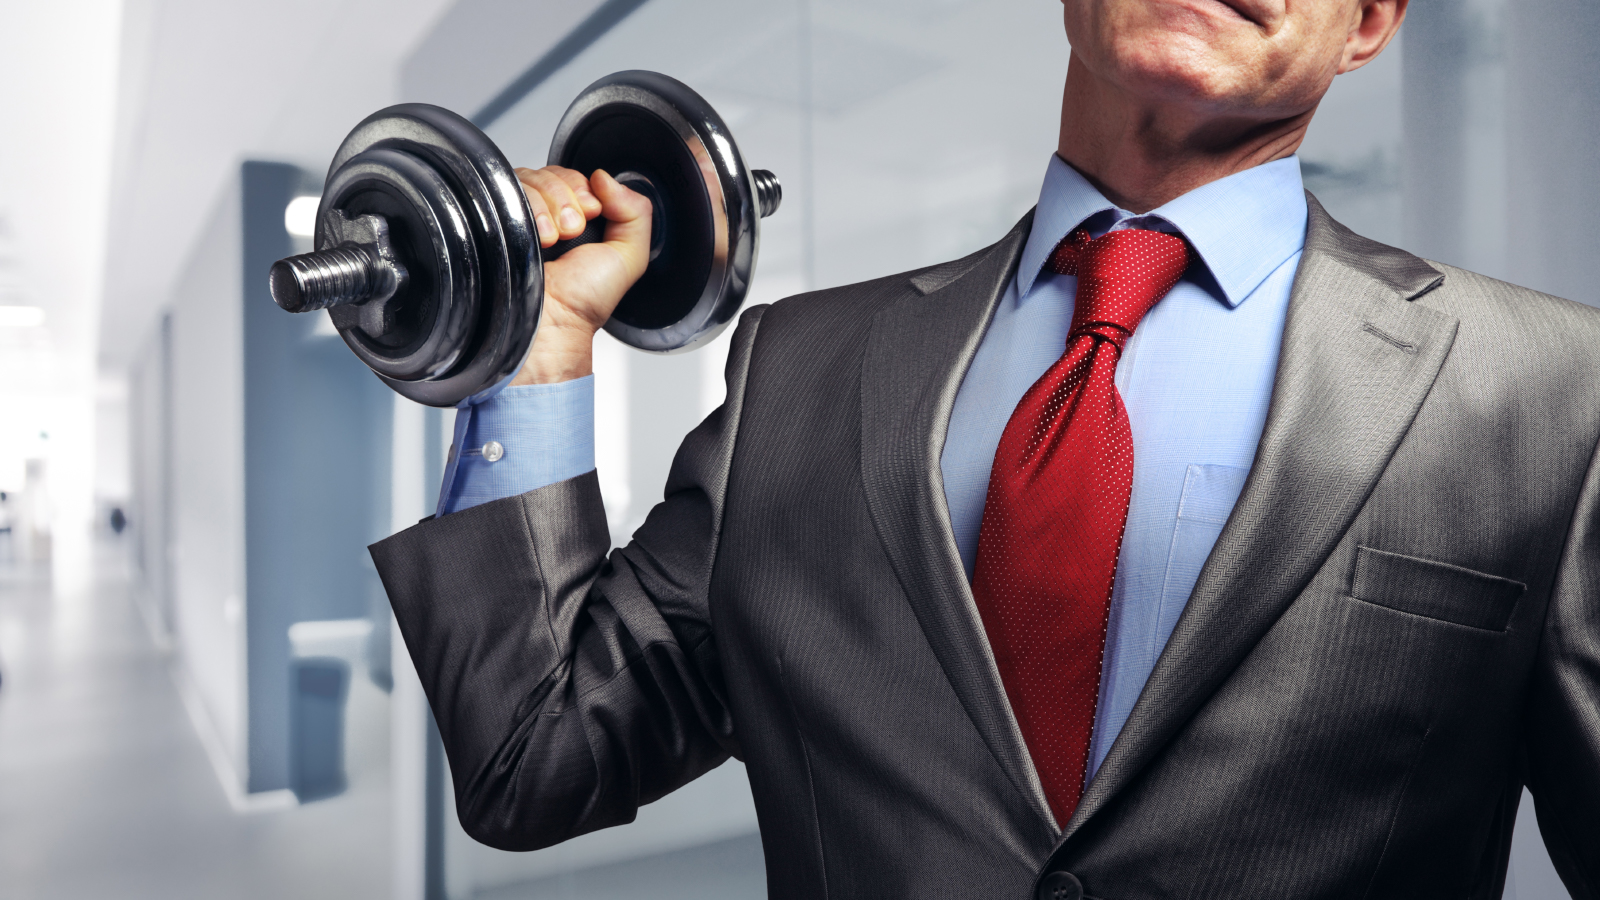 Man in suit lifting dumbbell.